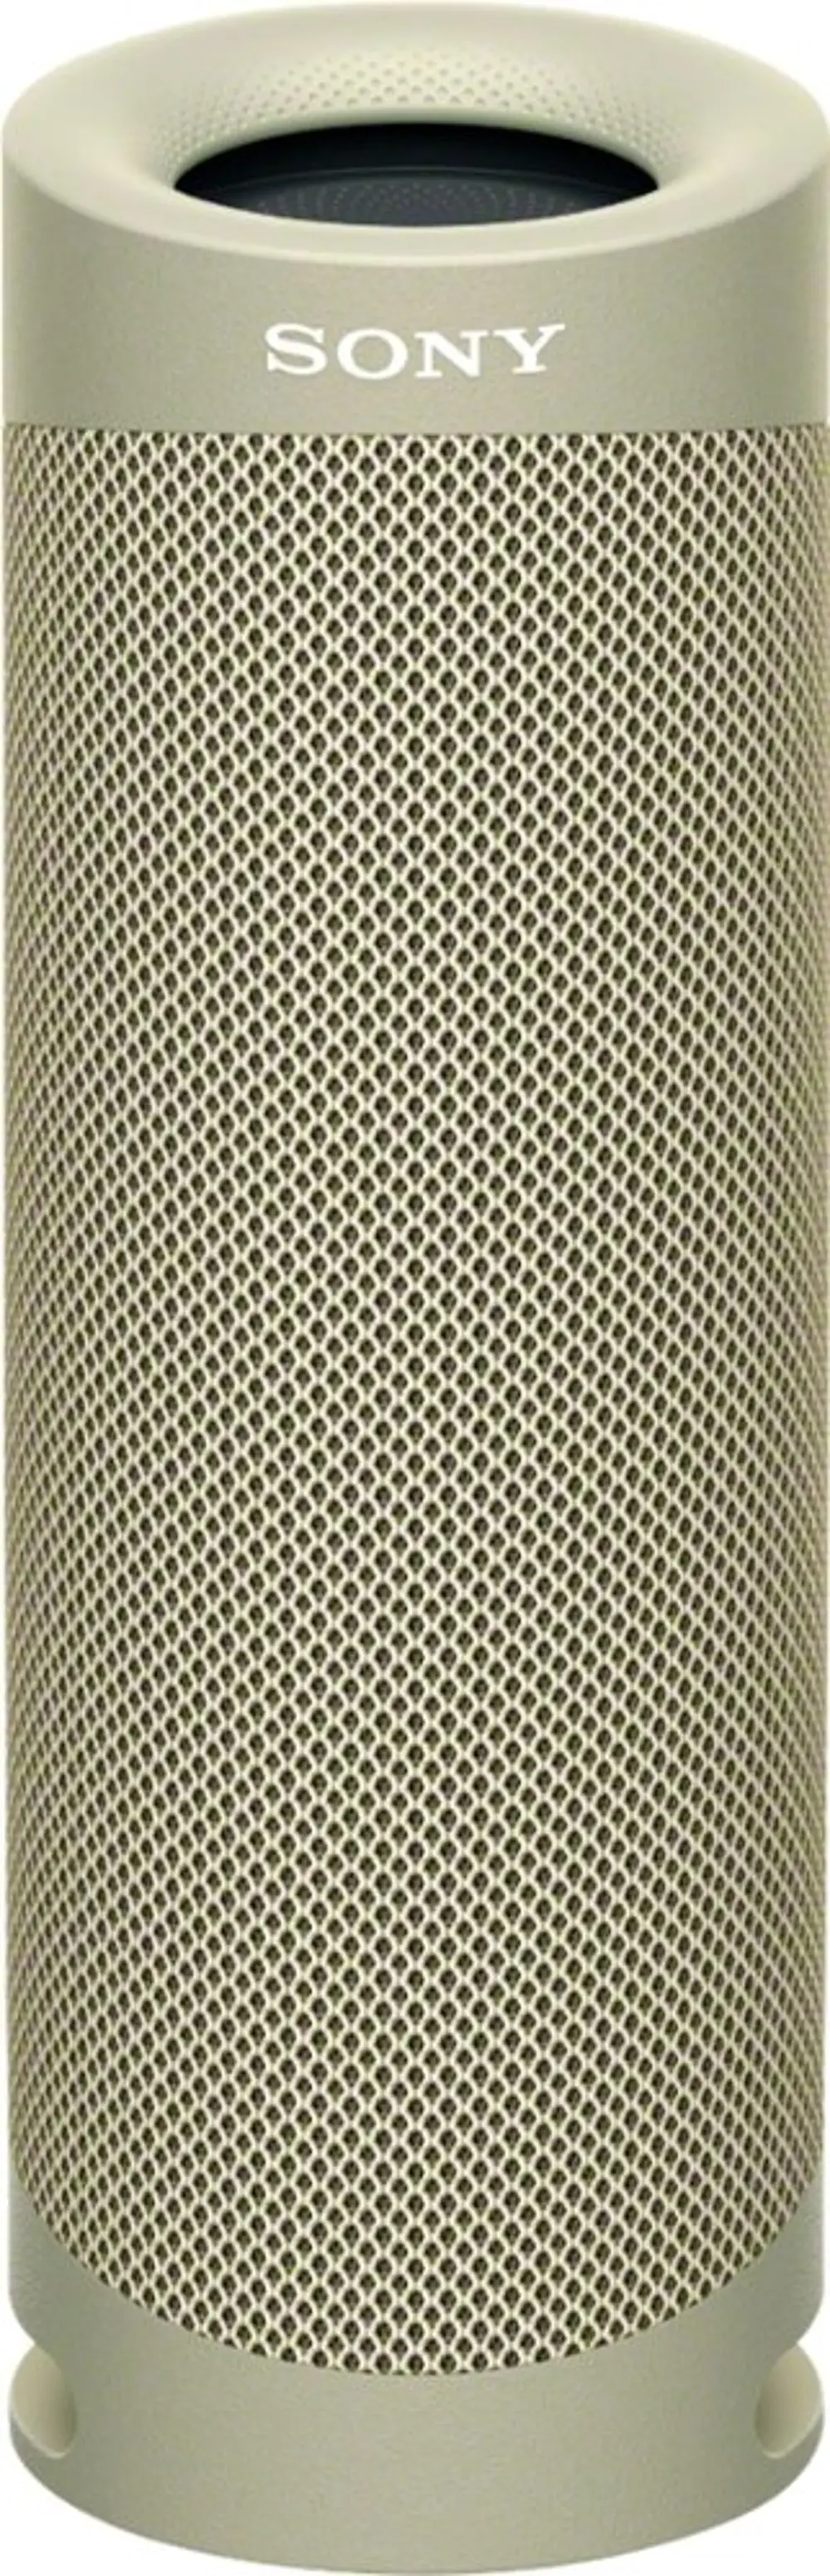 SRSXB23.TAUPE Sony Taupe Waterproof Portable Speaker with Extra Bass - XB23-1